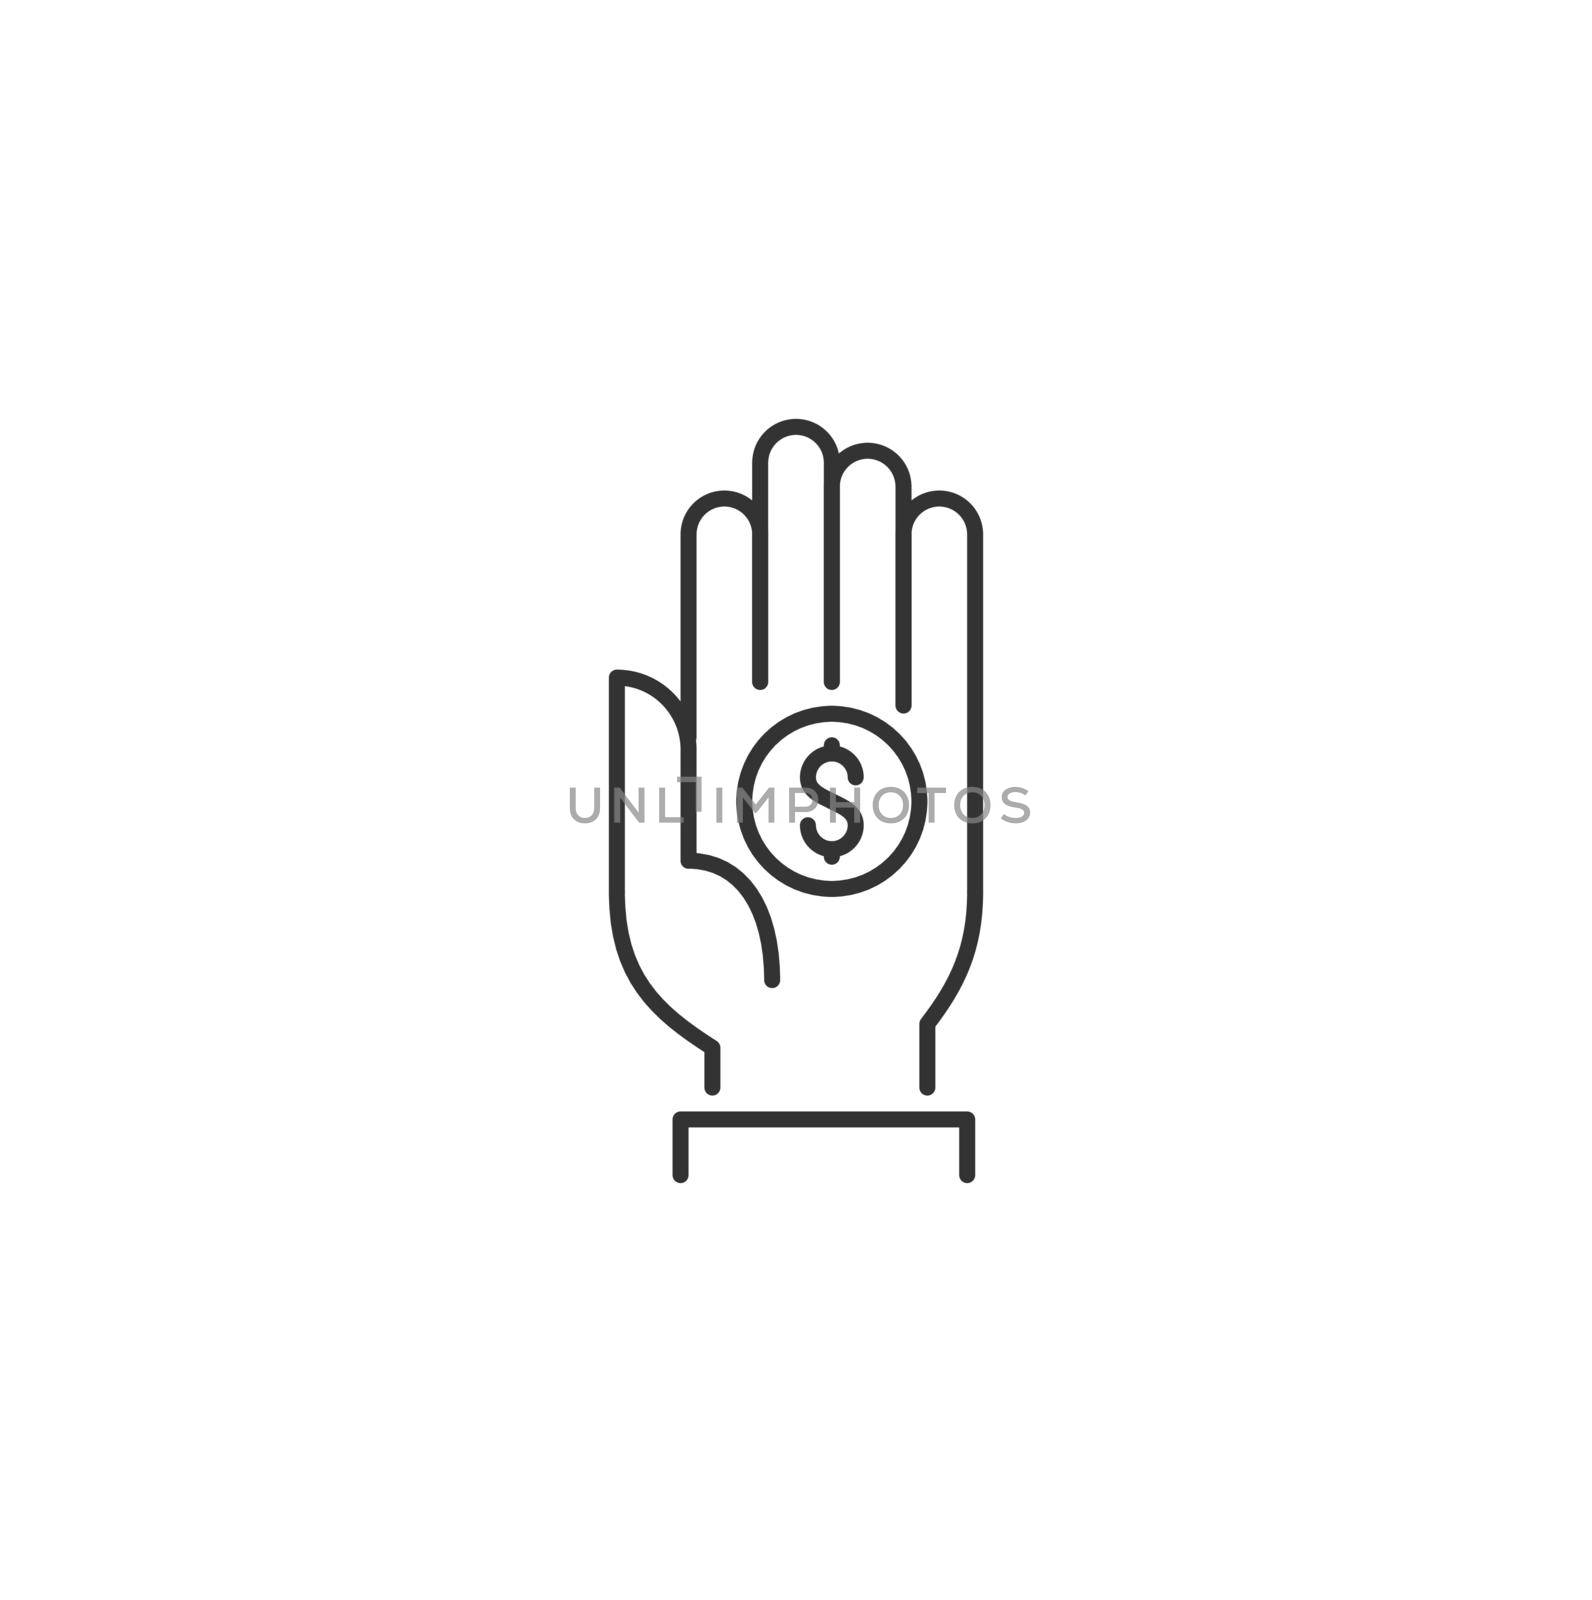 Hands coins 3.eps by smoki